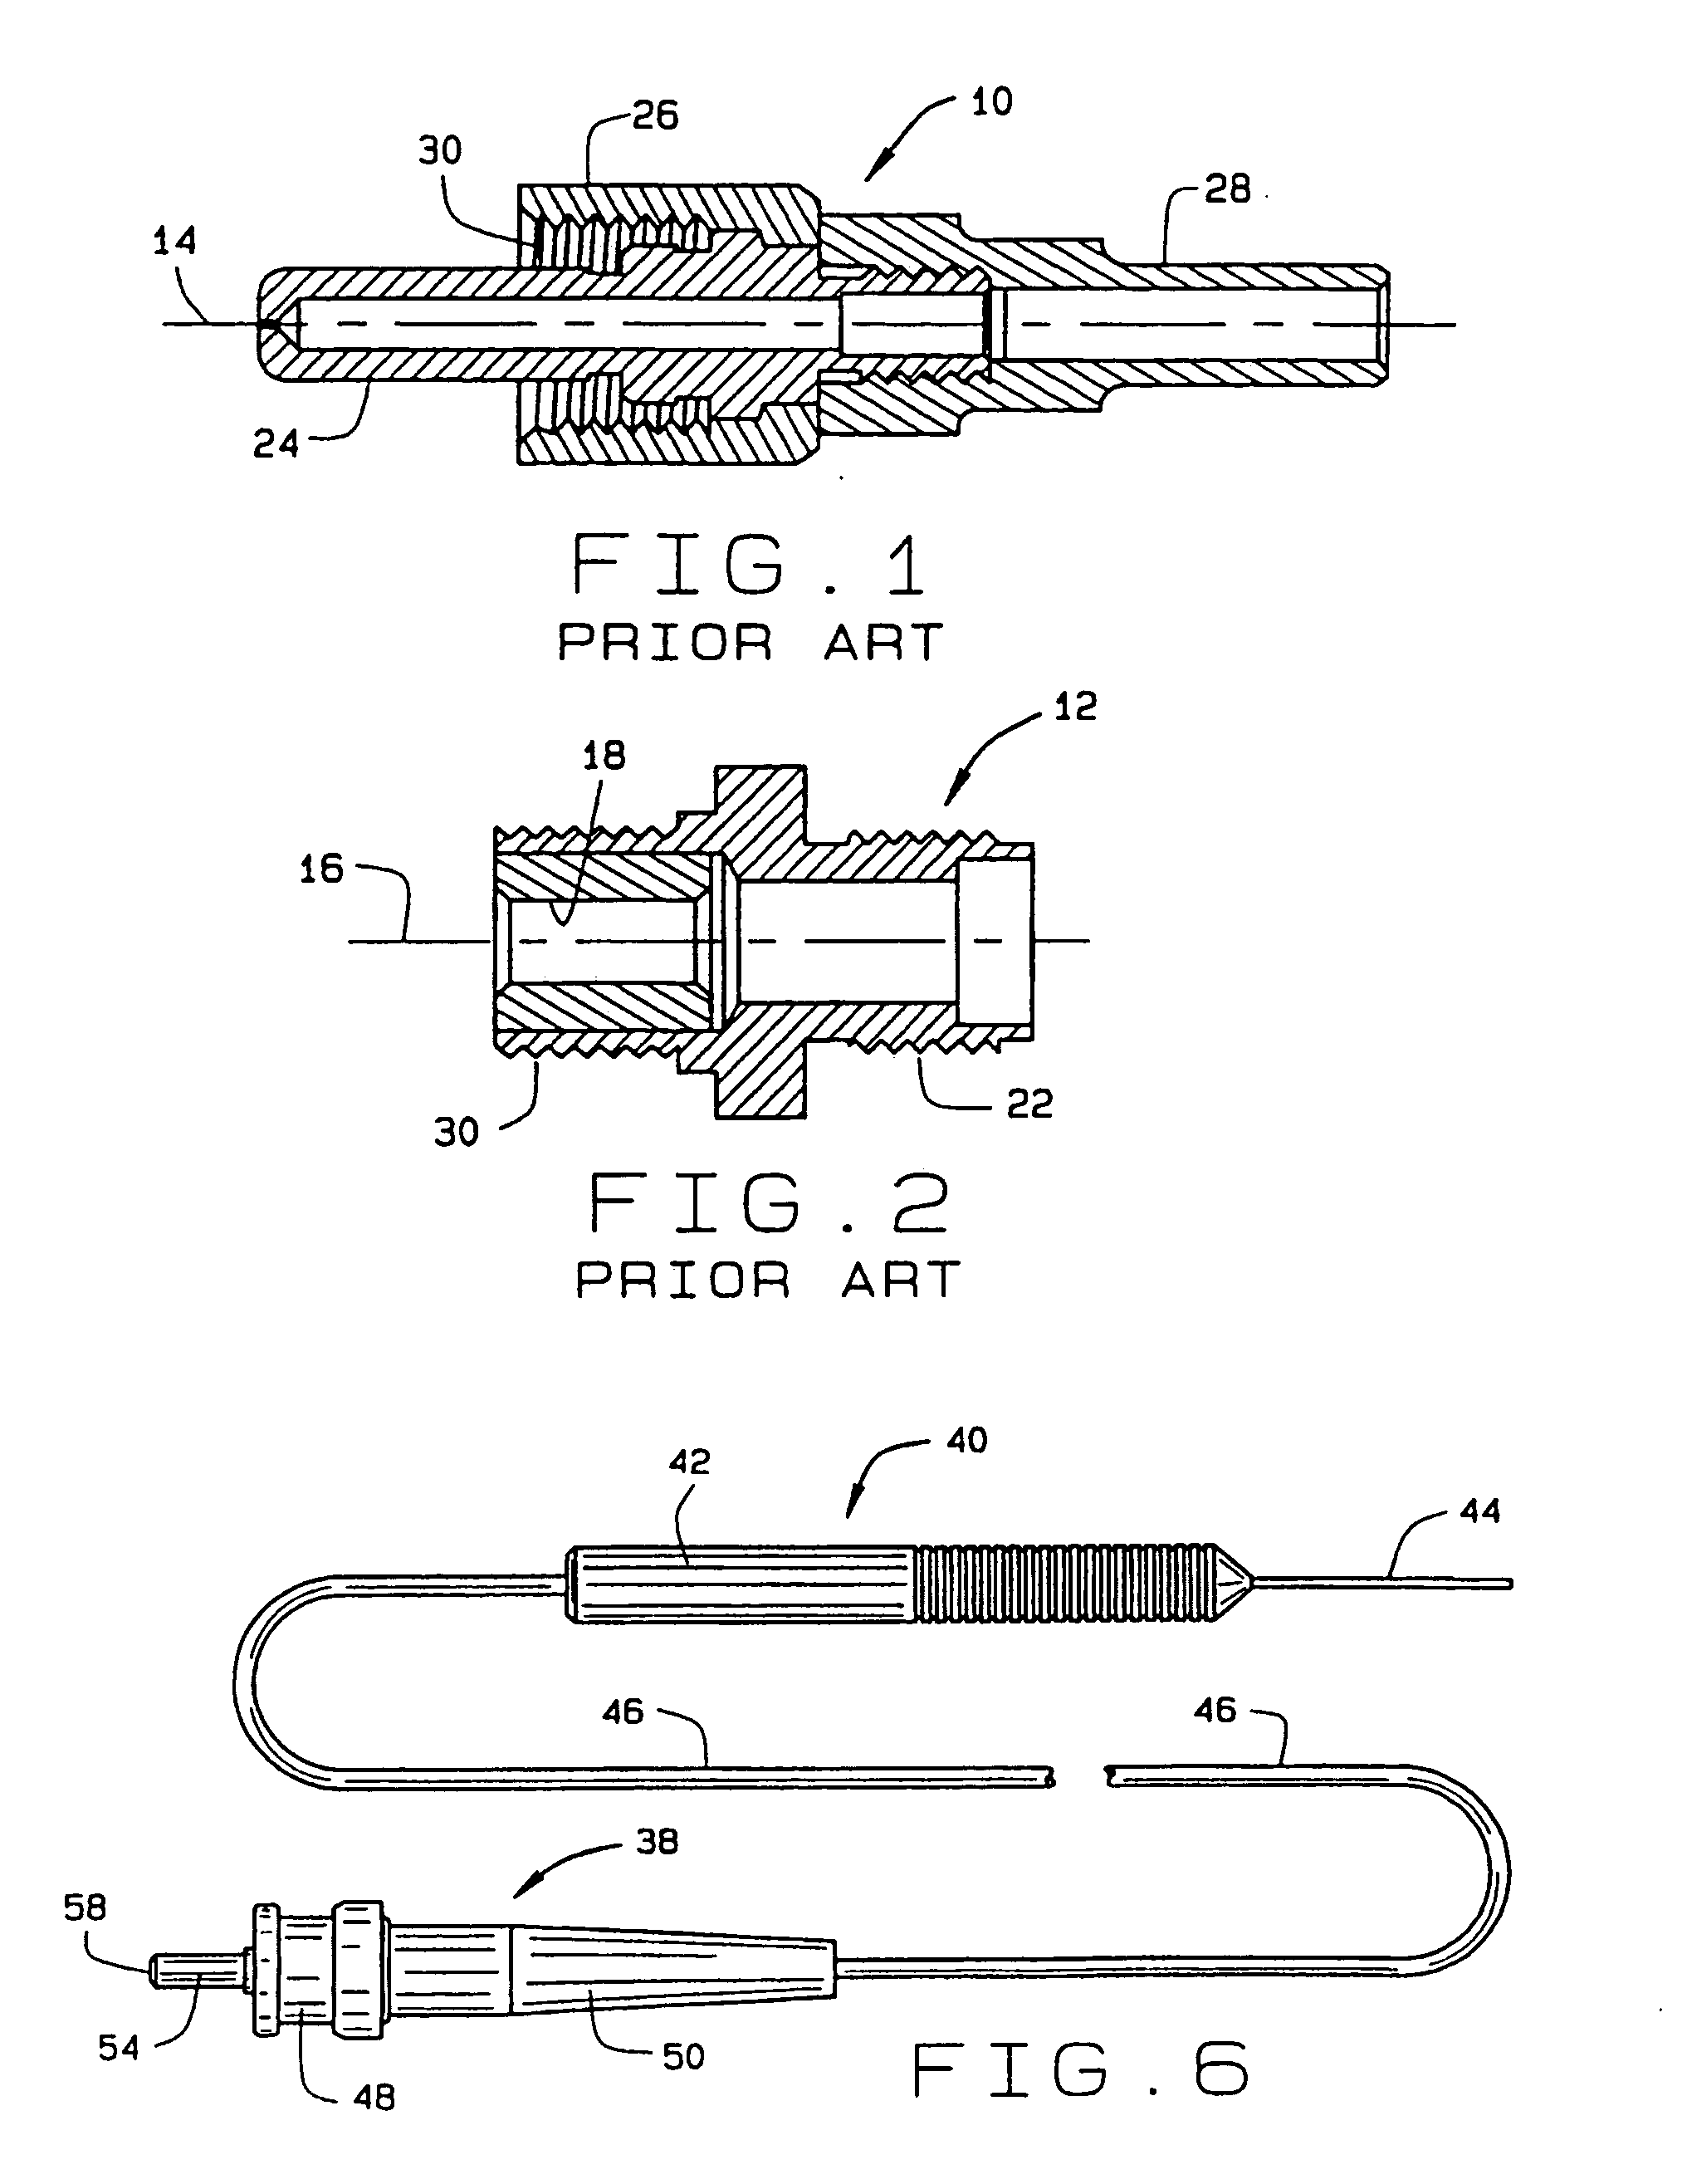 Adapter for coupling an external post connector or a BNC connector to an SMA bushing